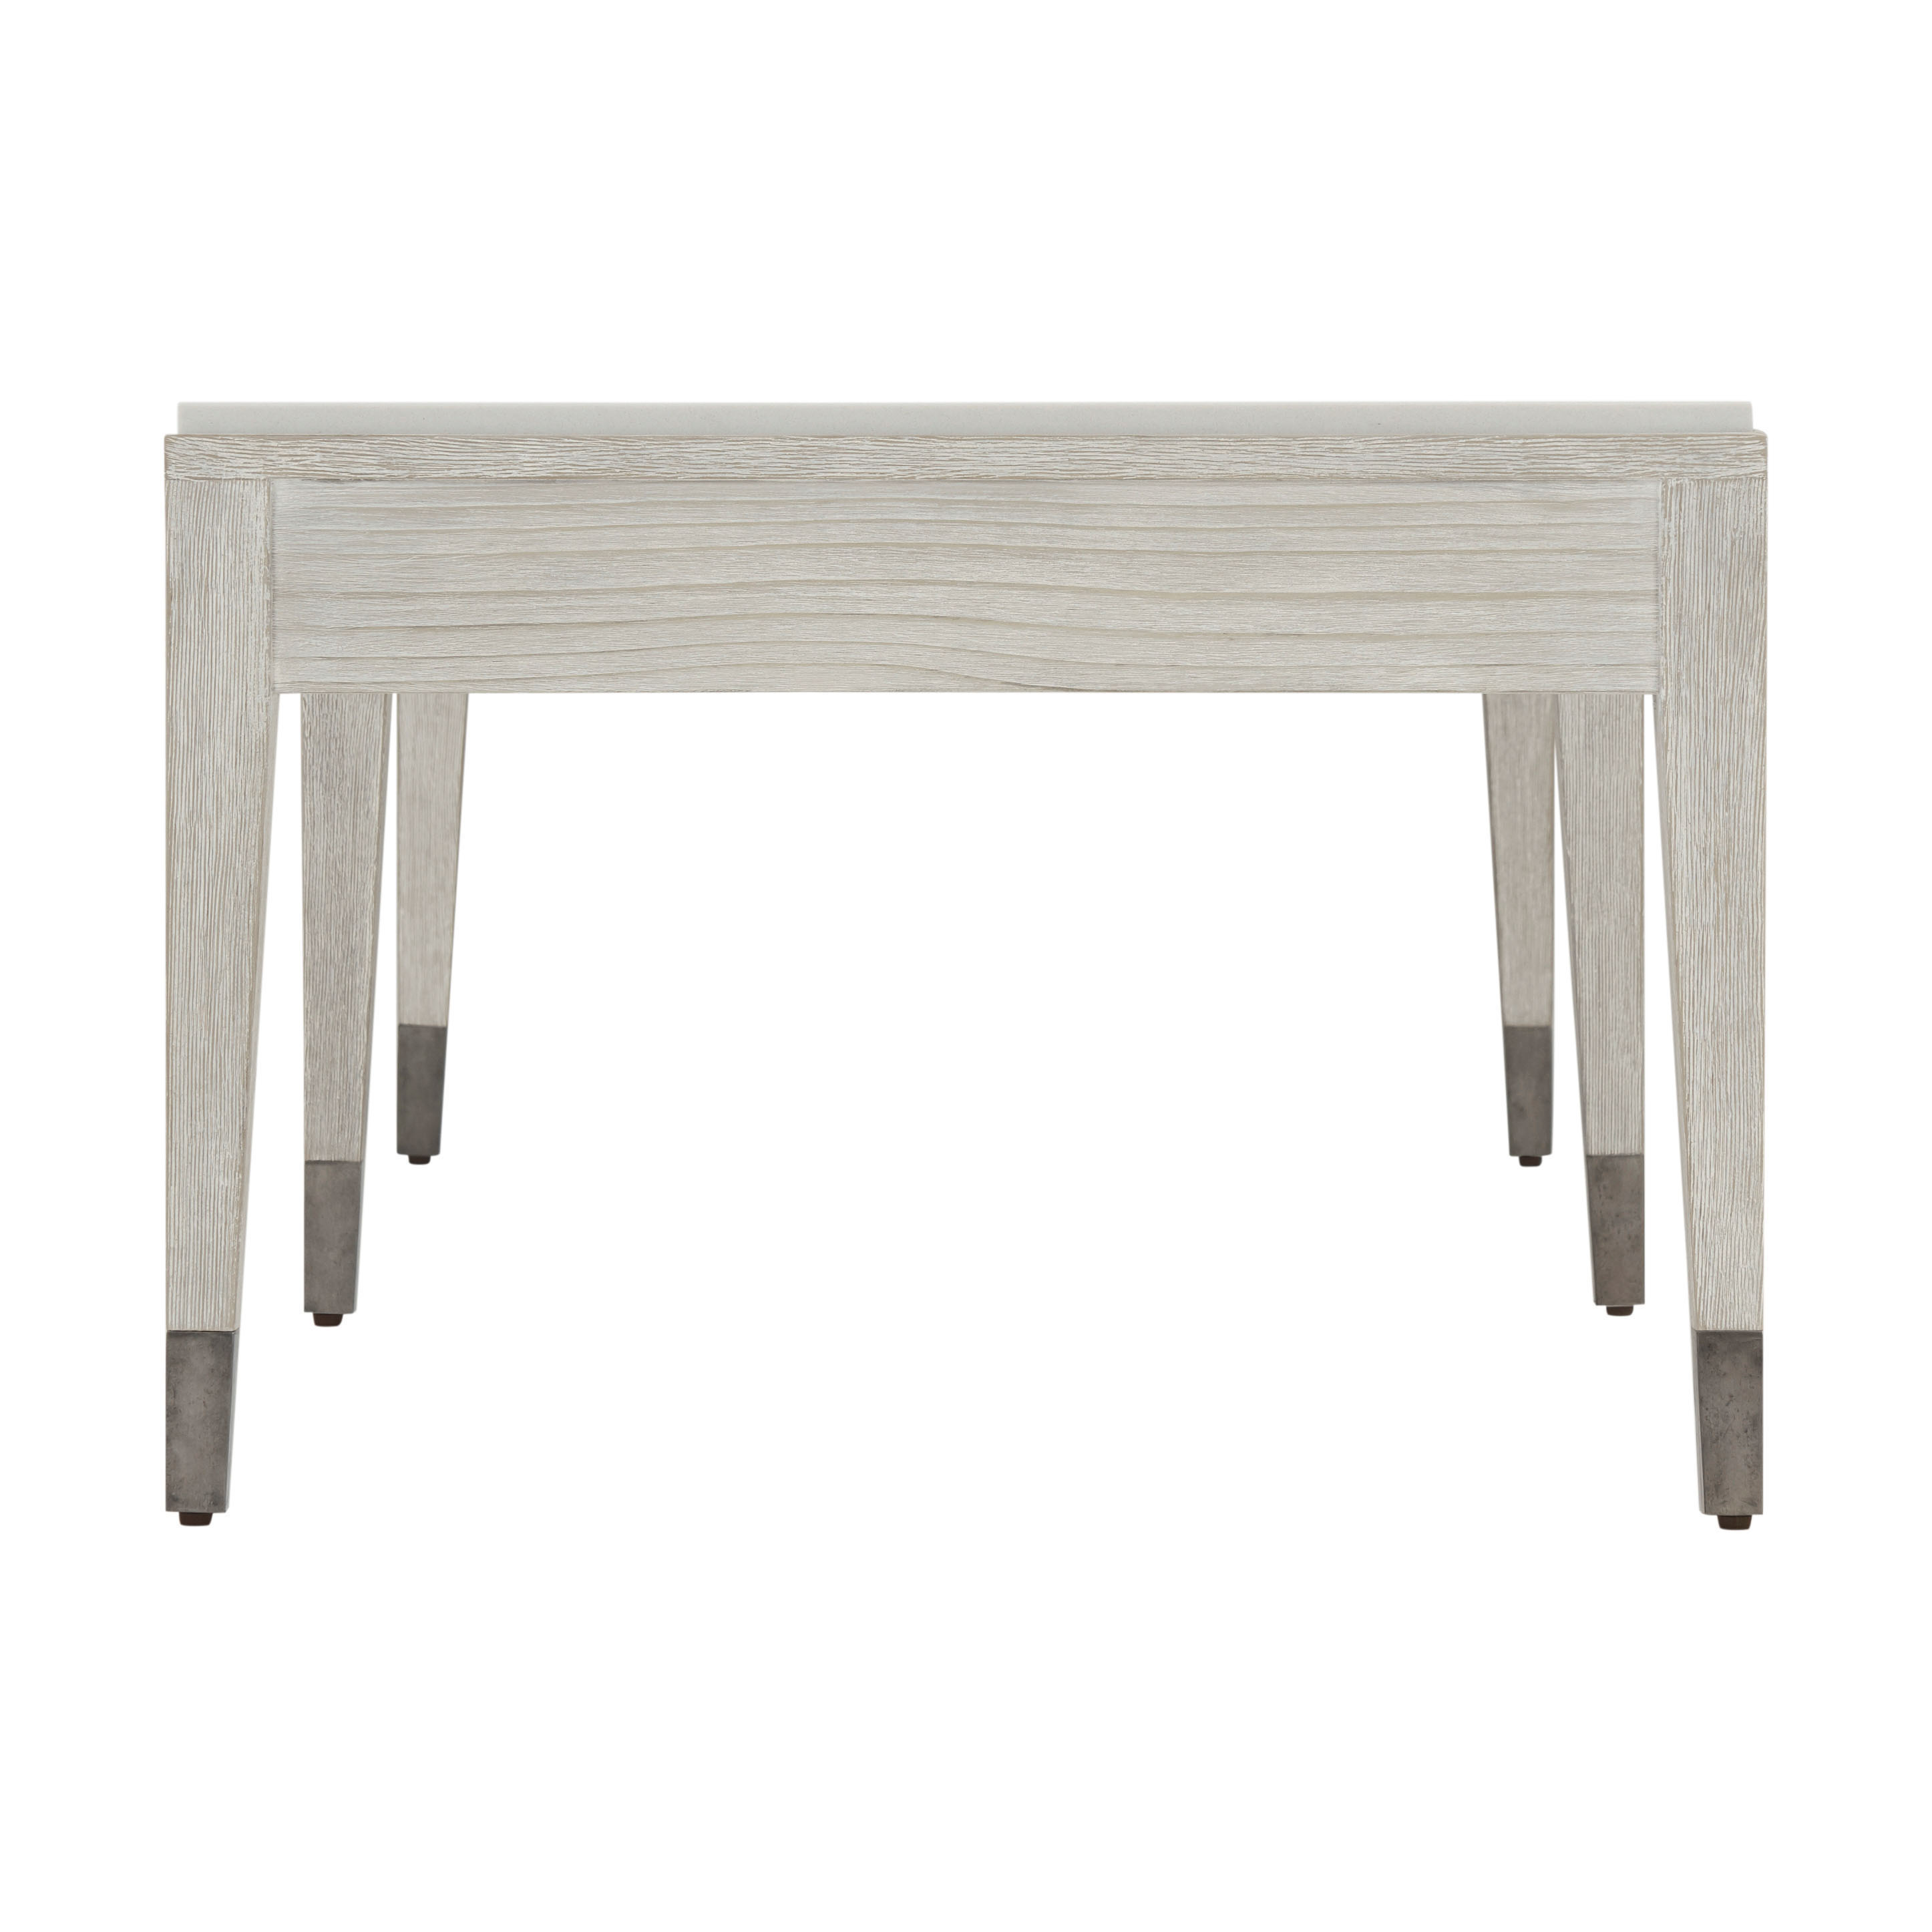 BREEZE TWO DRAWER COCKTAIL TABLE